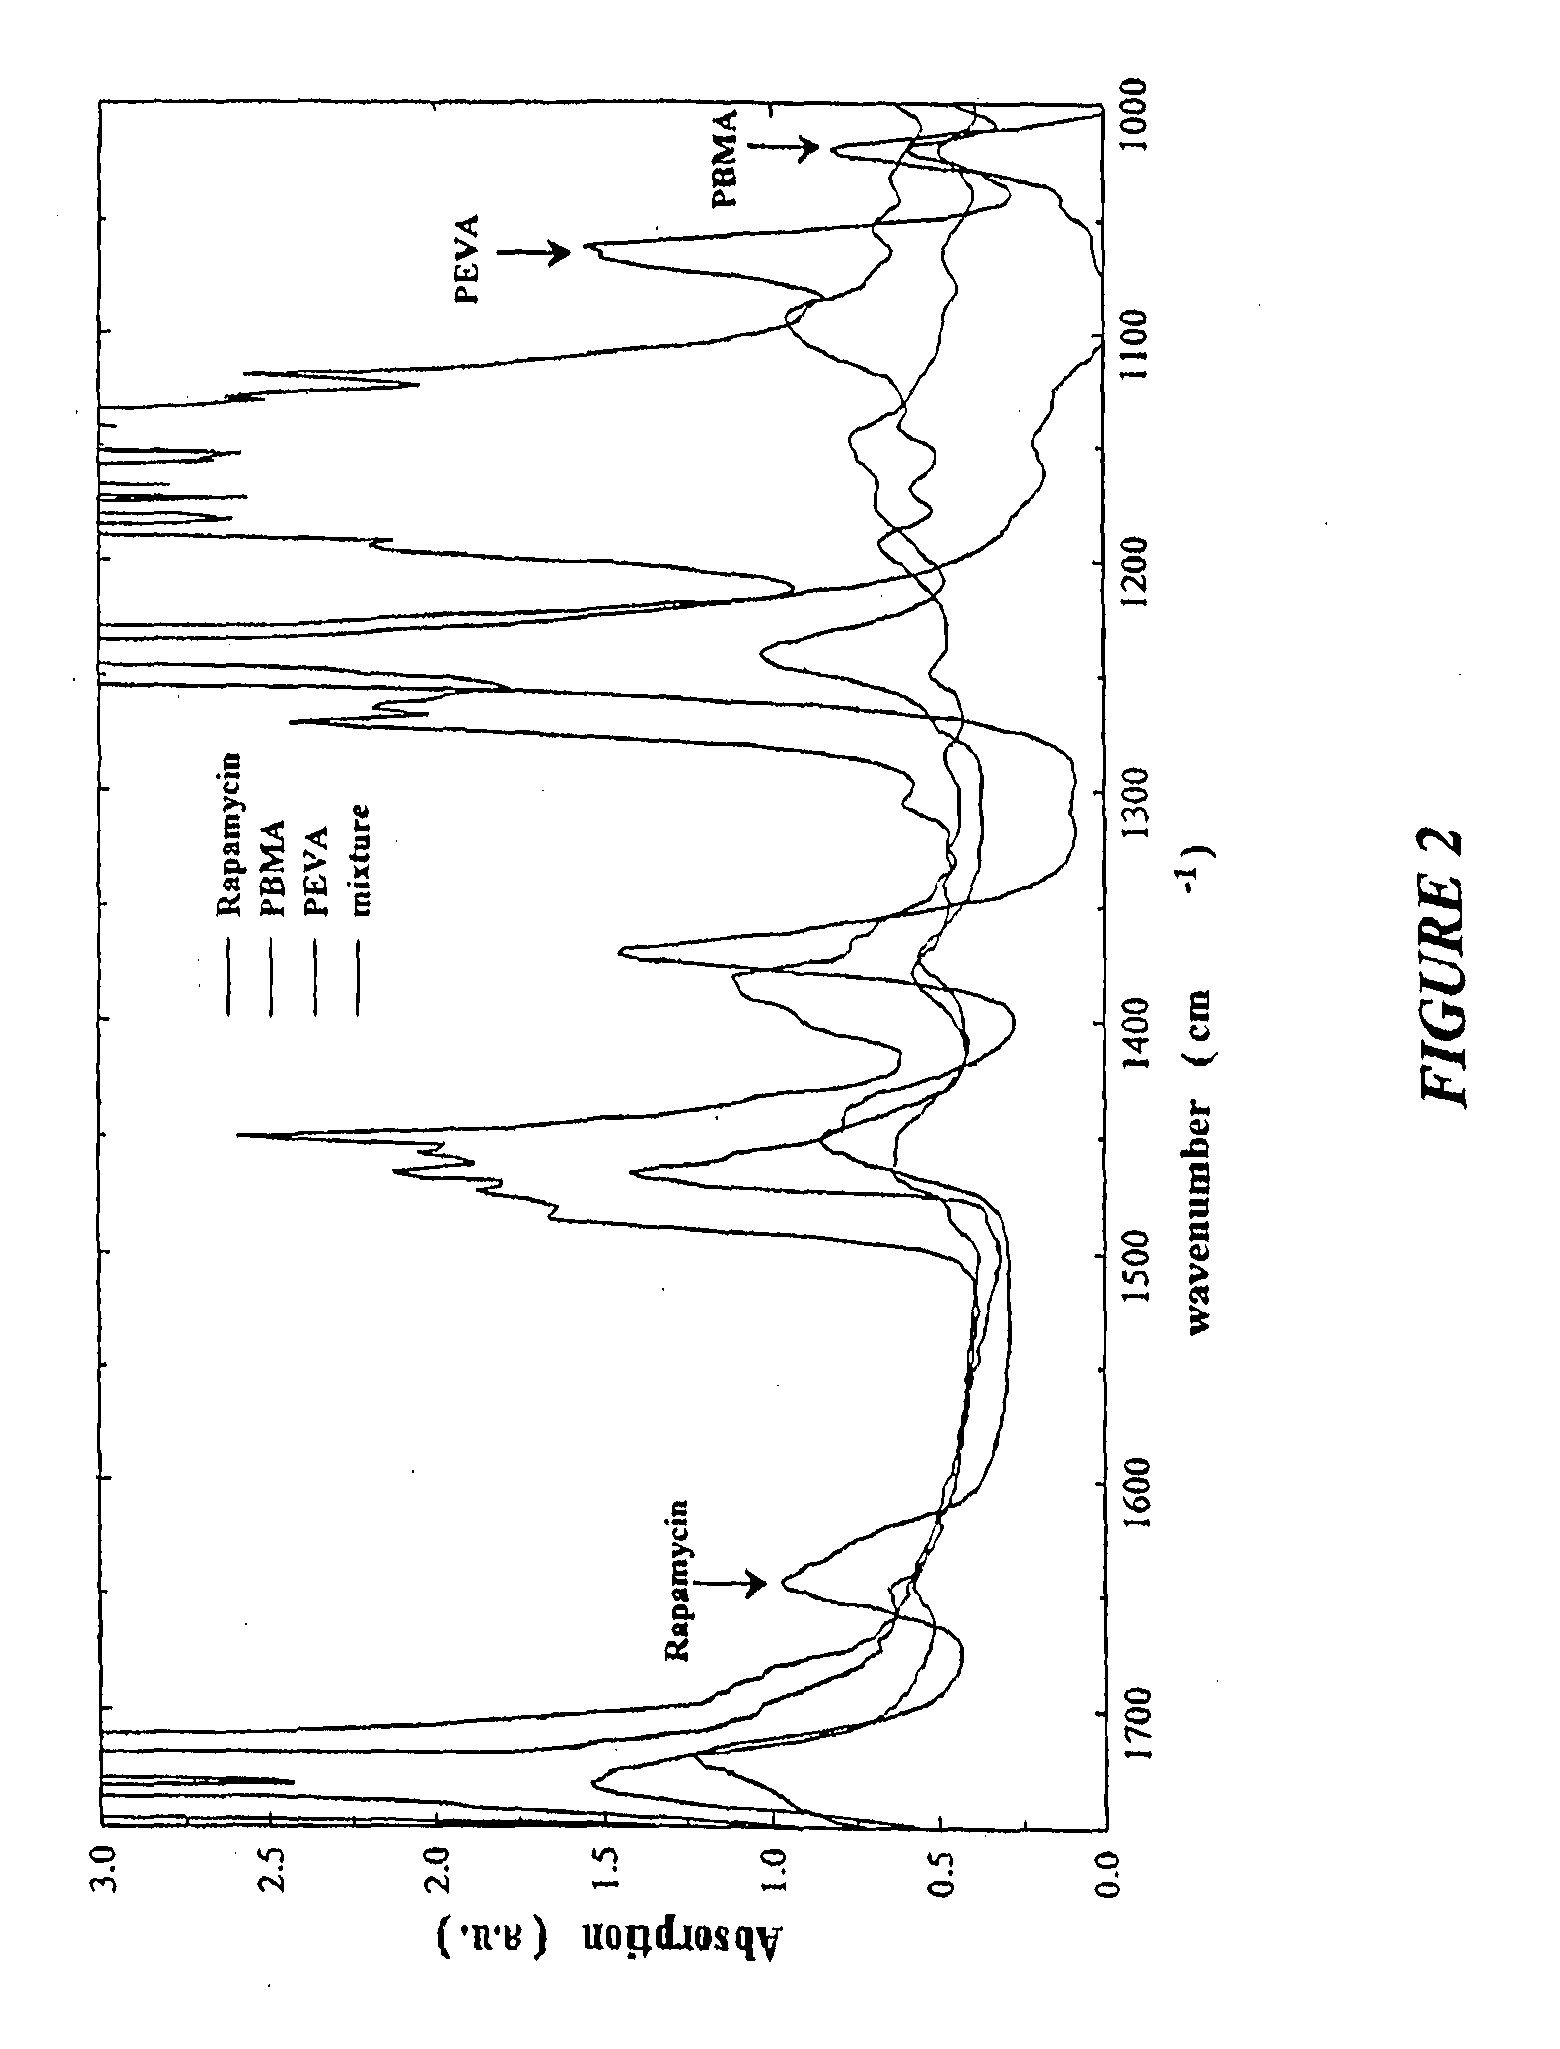 Stent with polymer coating containing amorphous rapamycin